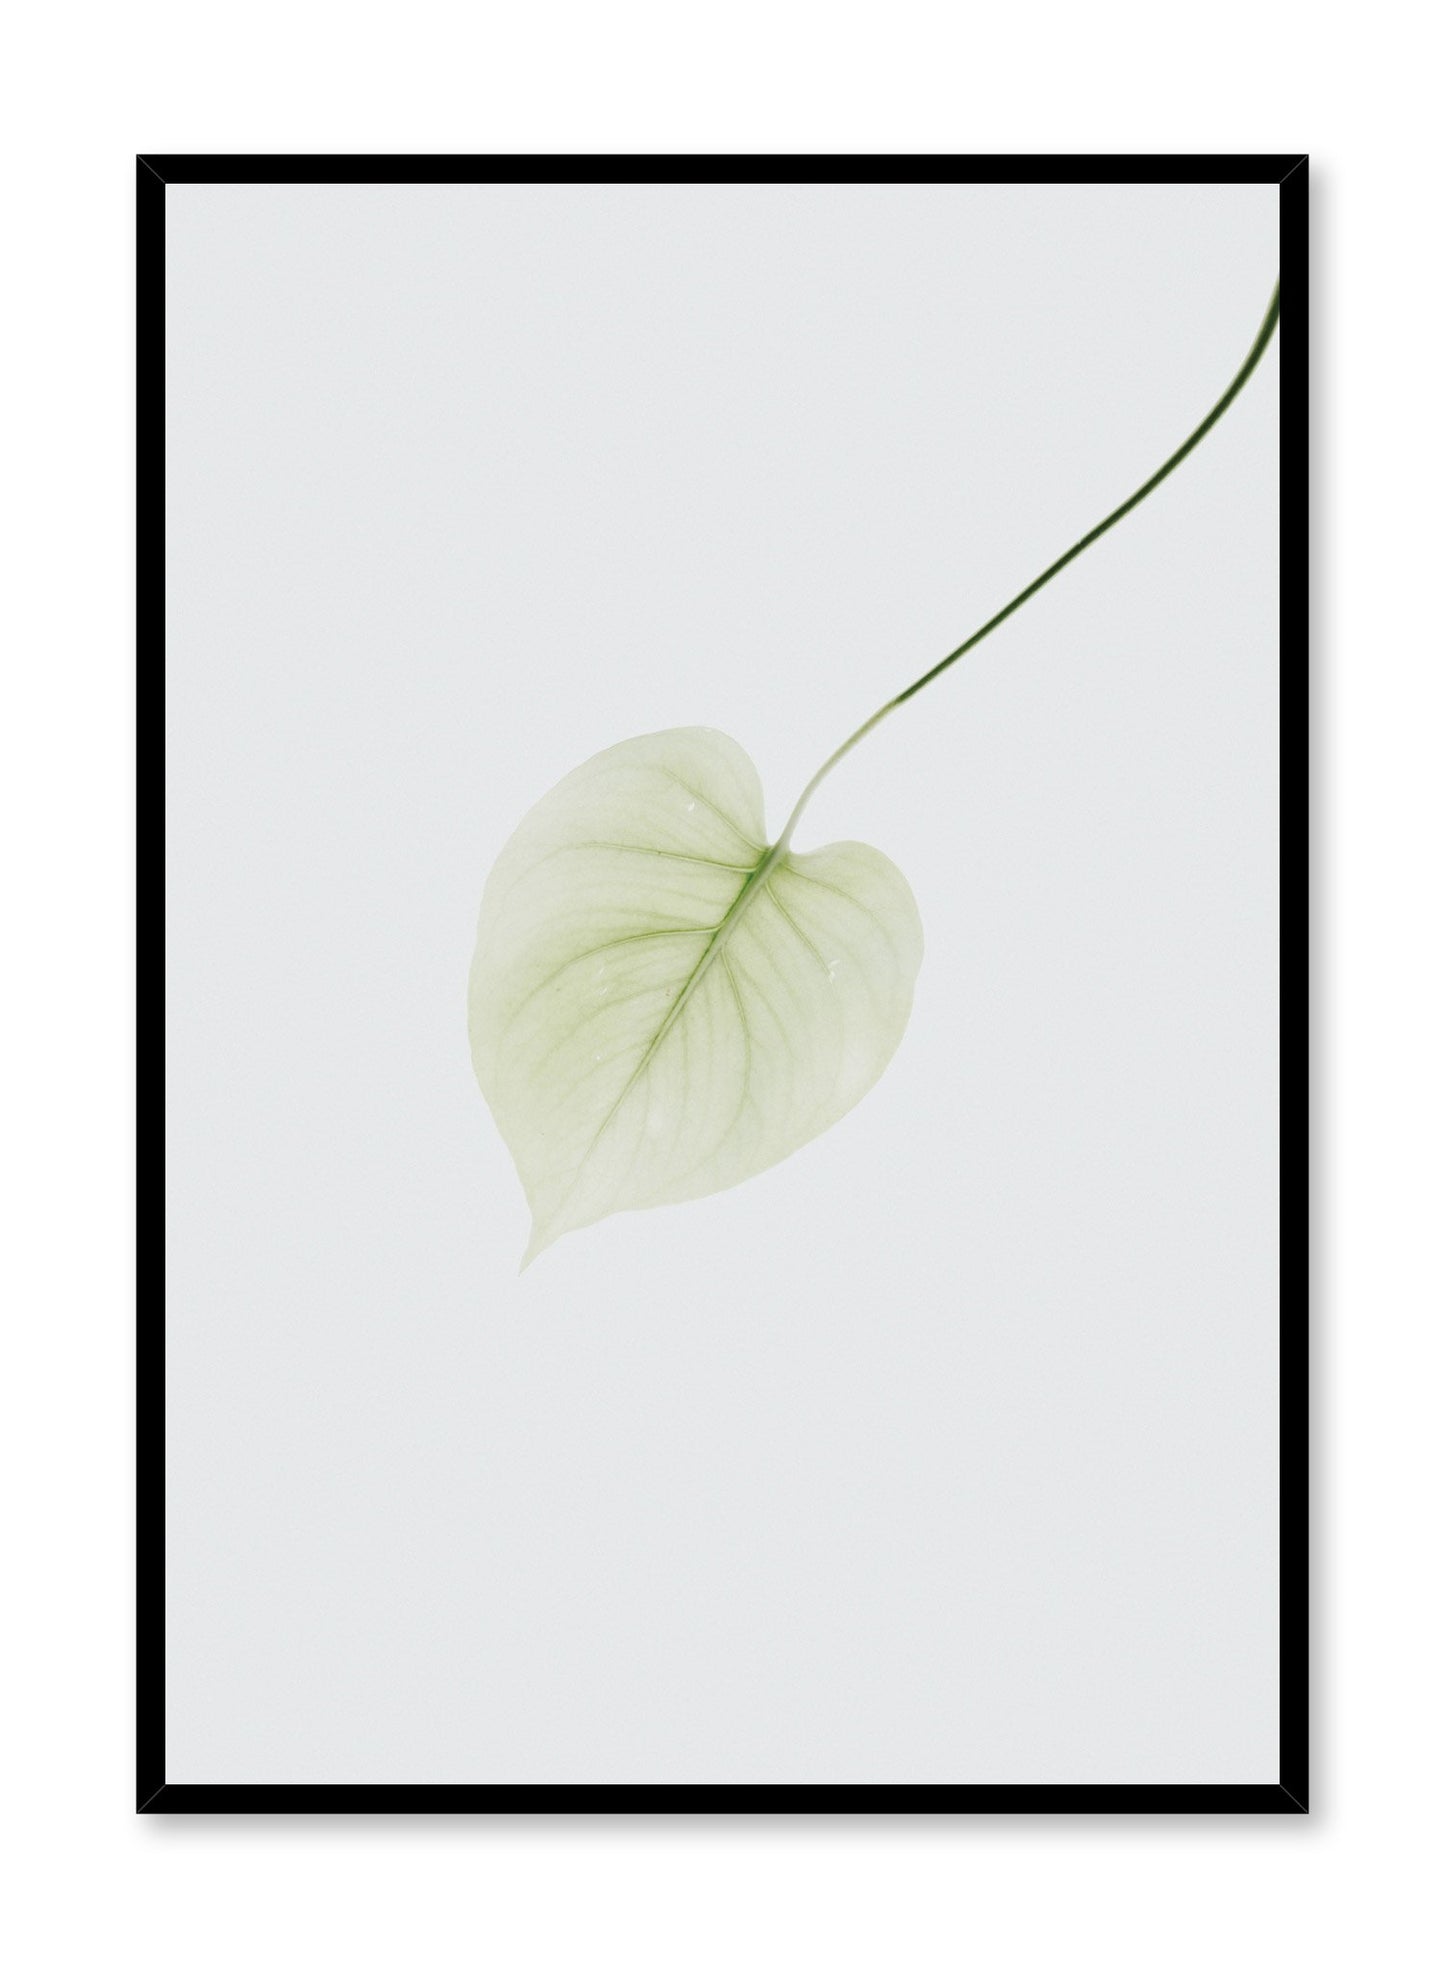 Minimalist design poster by Opposite Wall with Pothos Leaf photography